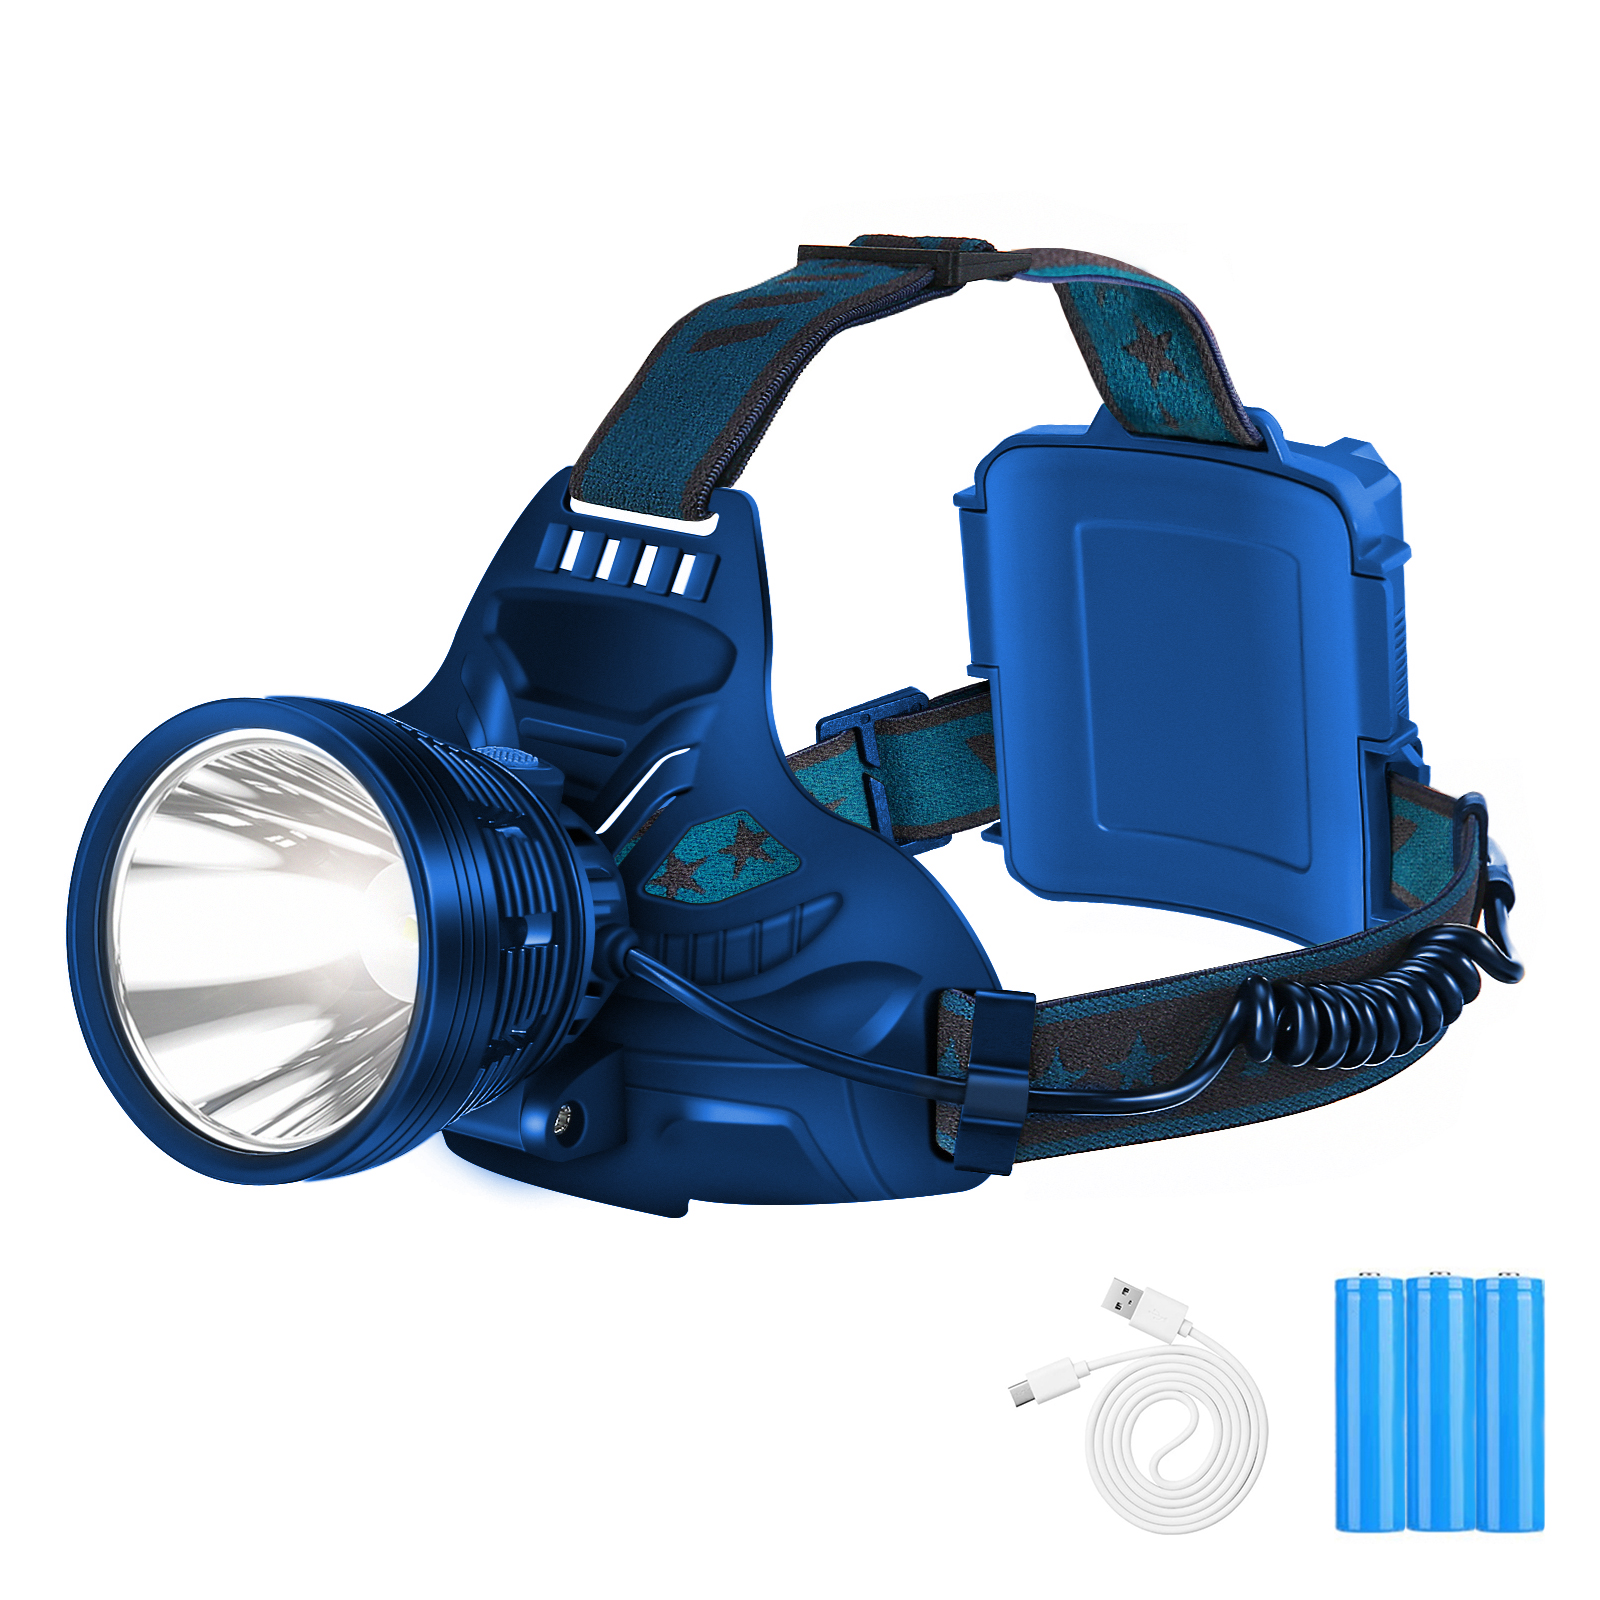 Find P70 Lamp Holder Big Beam Headlamp Work Lamp Rechargeable with USB Charging Cable for Sale on Gipsybee.com with cryptocurrencies